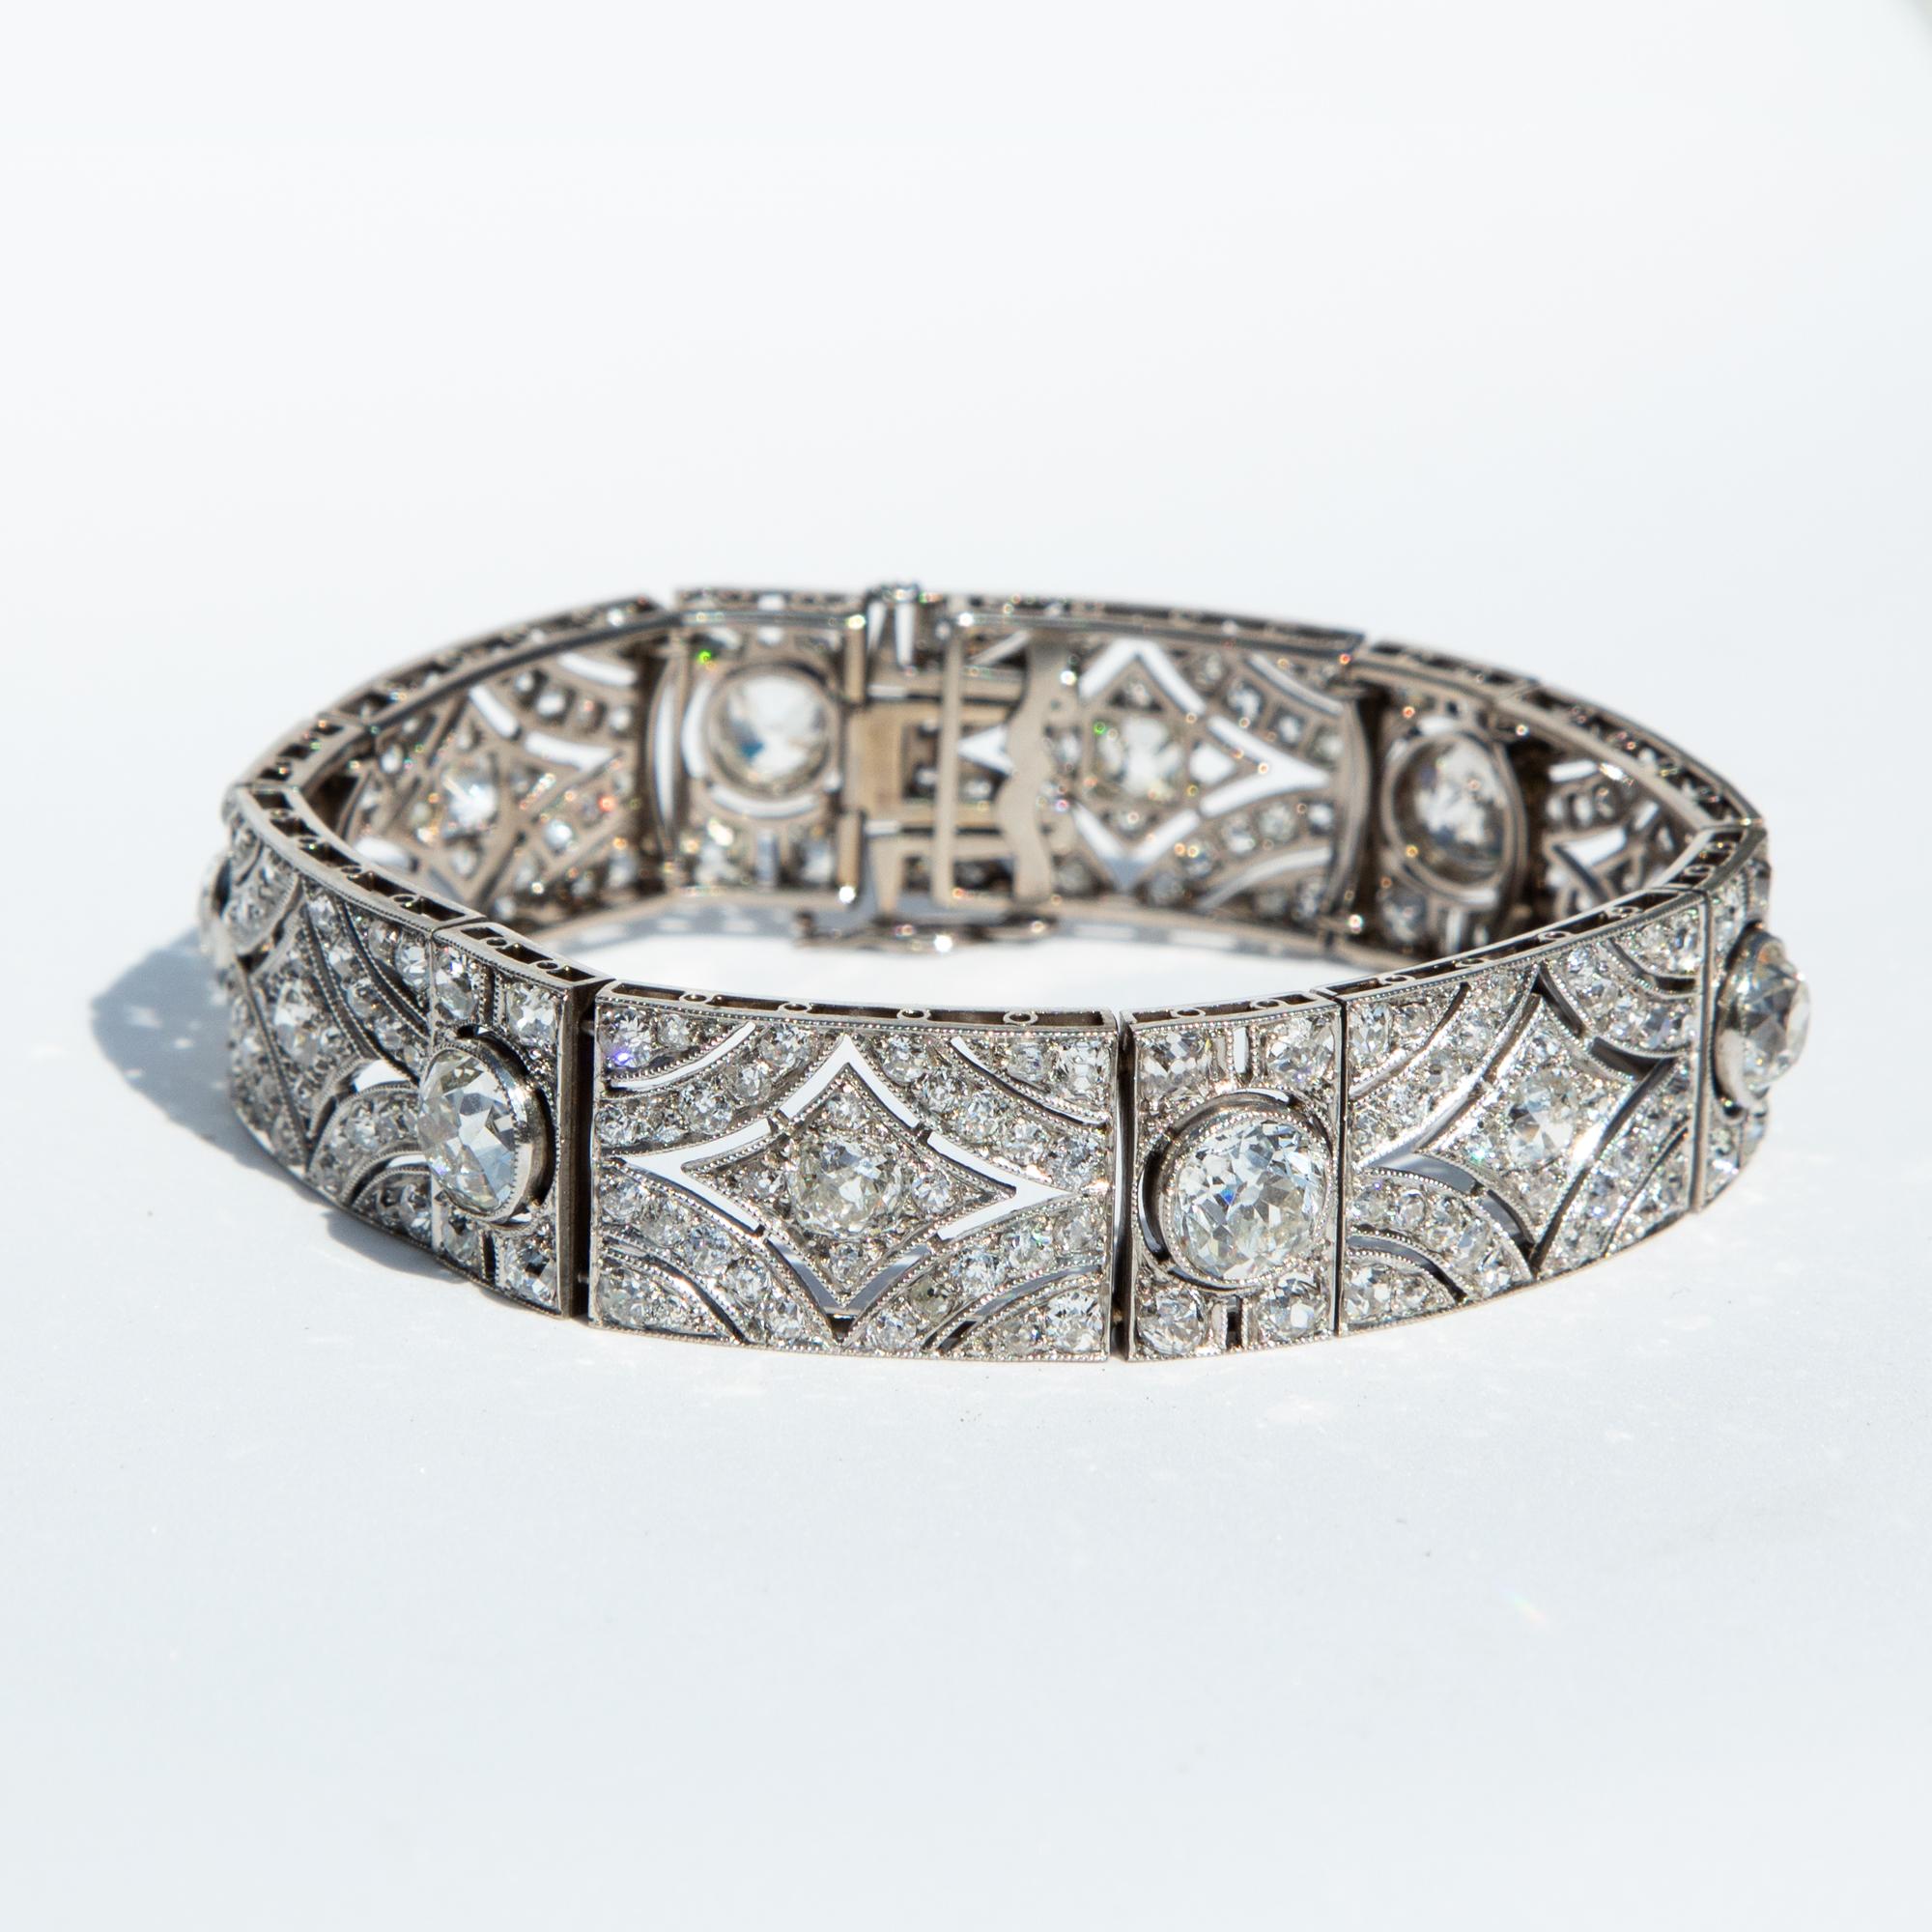 A beautifully intricate Art Deco diamond bracelet set in platinum. The six old European cut diamonds measure over 1 carat each with one further diamond of approximately 70 points. Total diamond weight certified 12.84 carats, G/H/K/L colour and